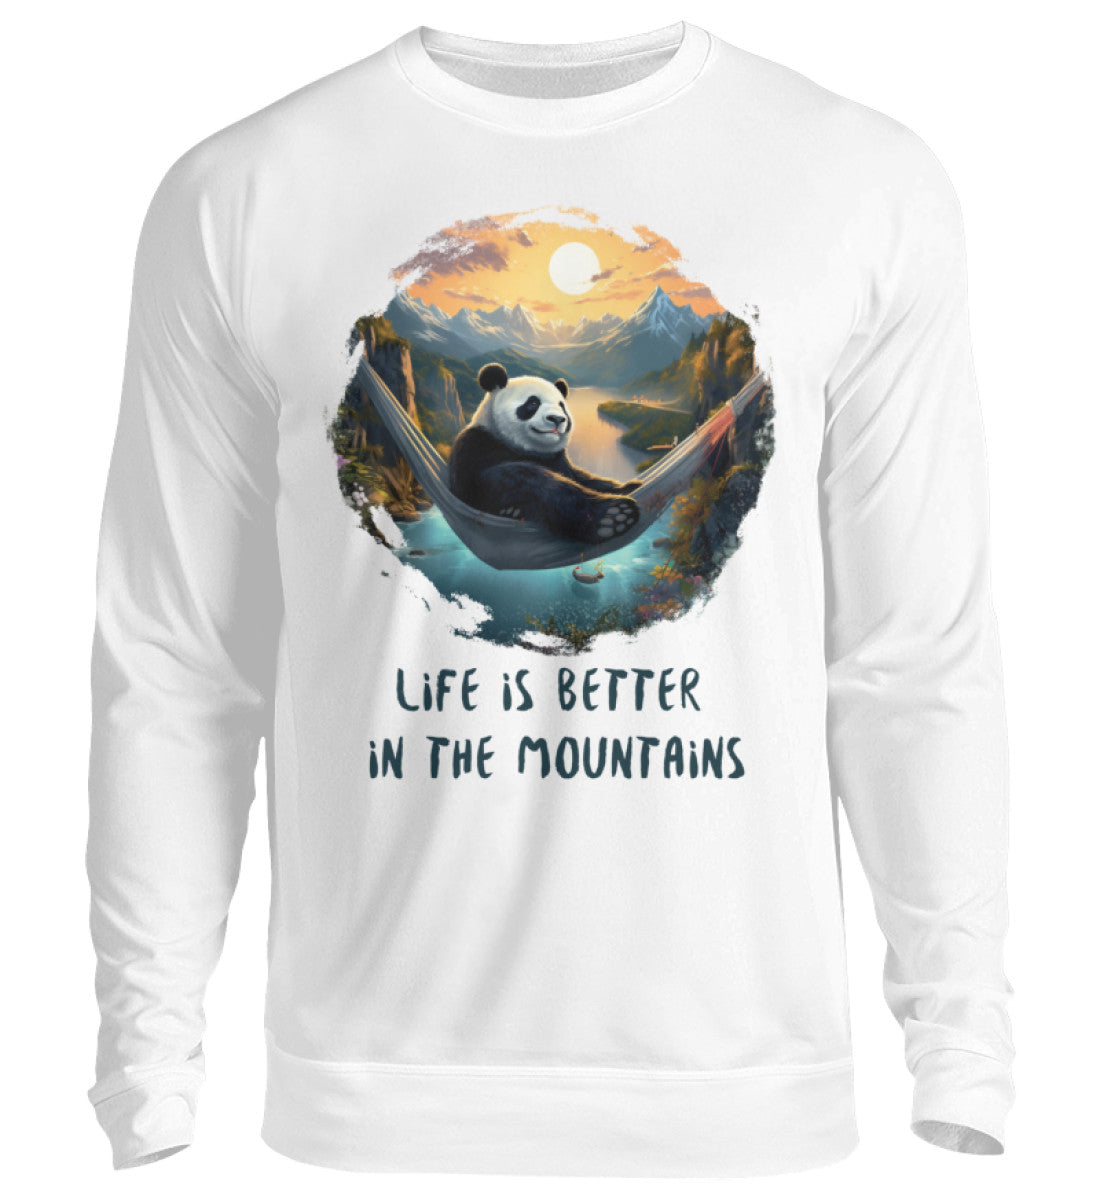 LIFE IS BETTER IN THE MOUNTAINS - Unisex Pullover